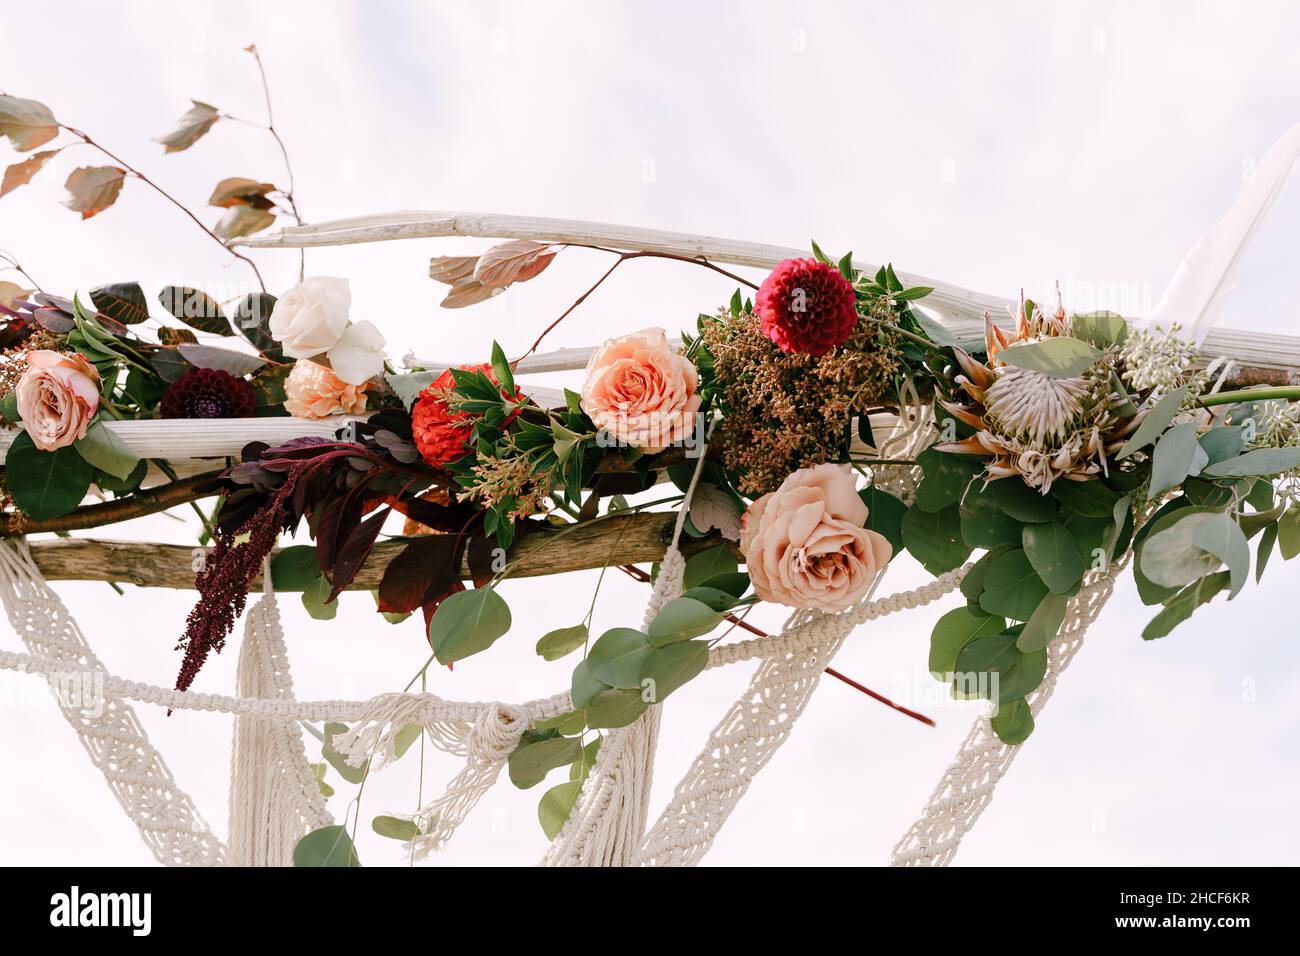 Top of the wedding arch decorated with macrame, roses, celosias and green leaves Stock Photo